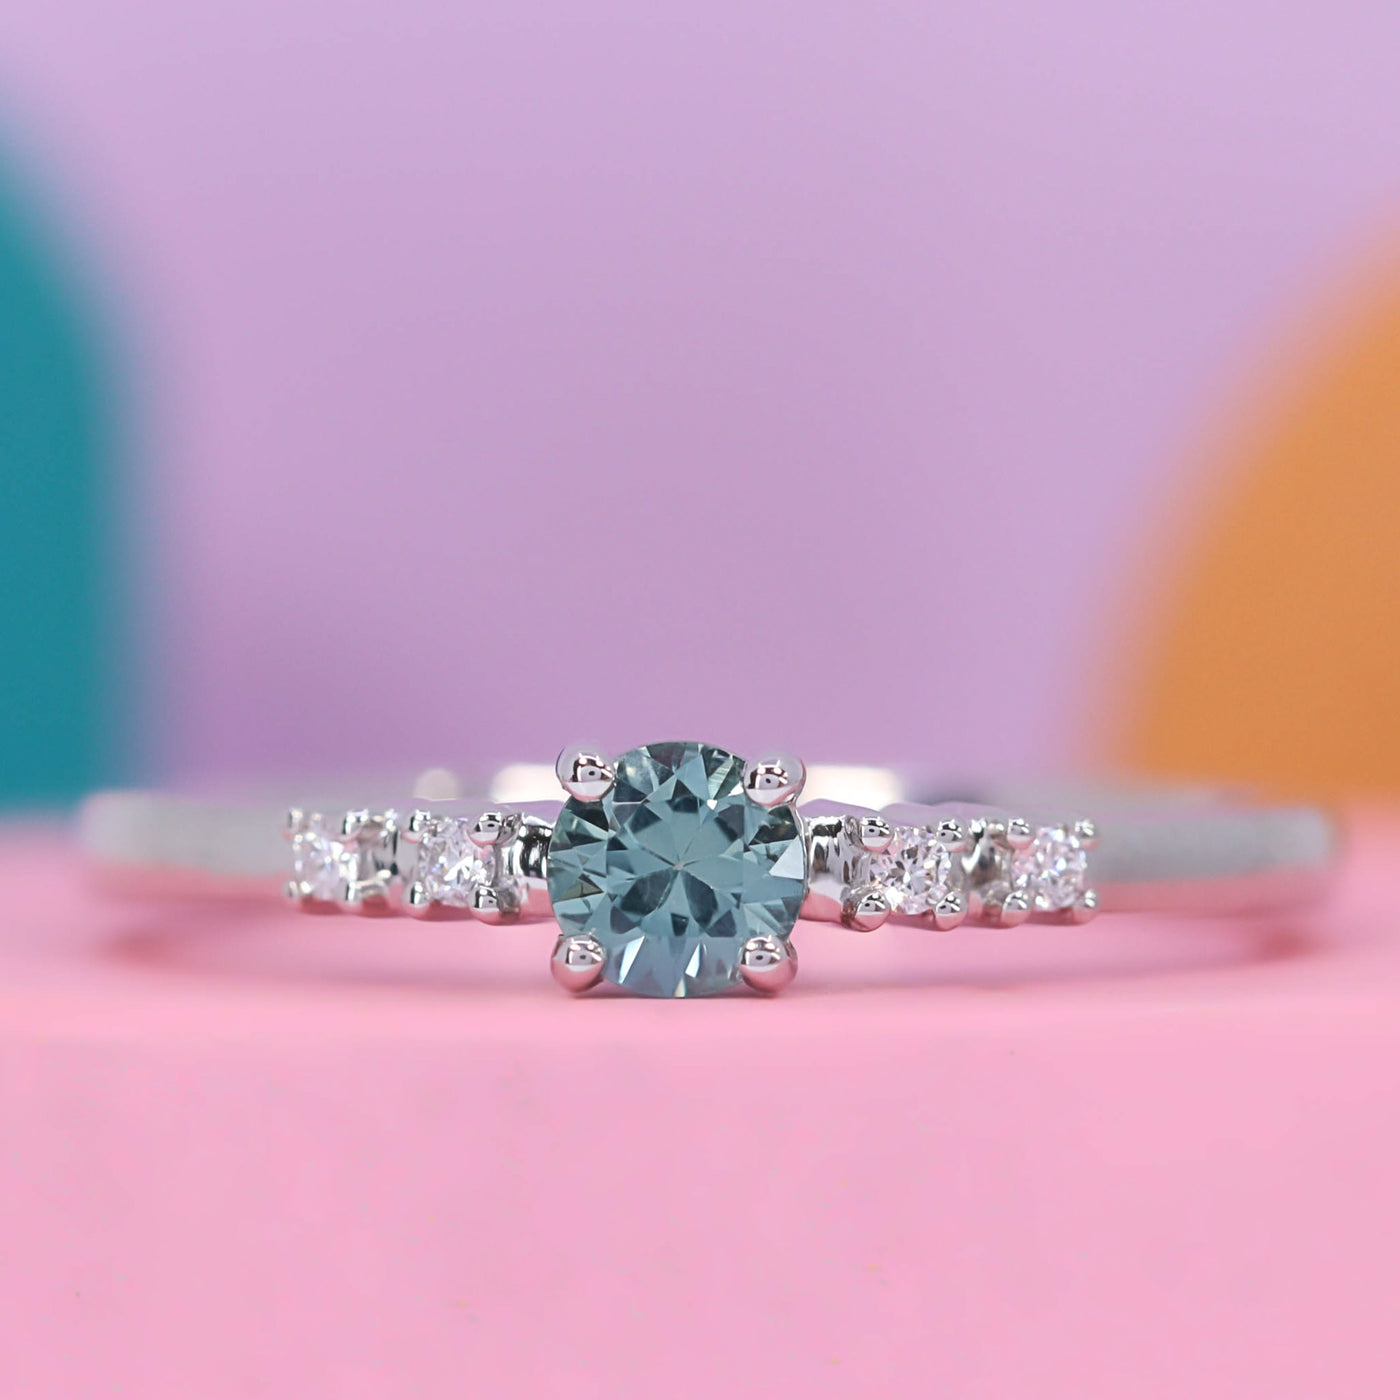 Lucie - Dainty Deco Collection - Round Brilliant Cut Teal Sapphire Engagement Ring with Diamond Set Shoulders - Made-to-Order